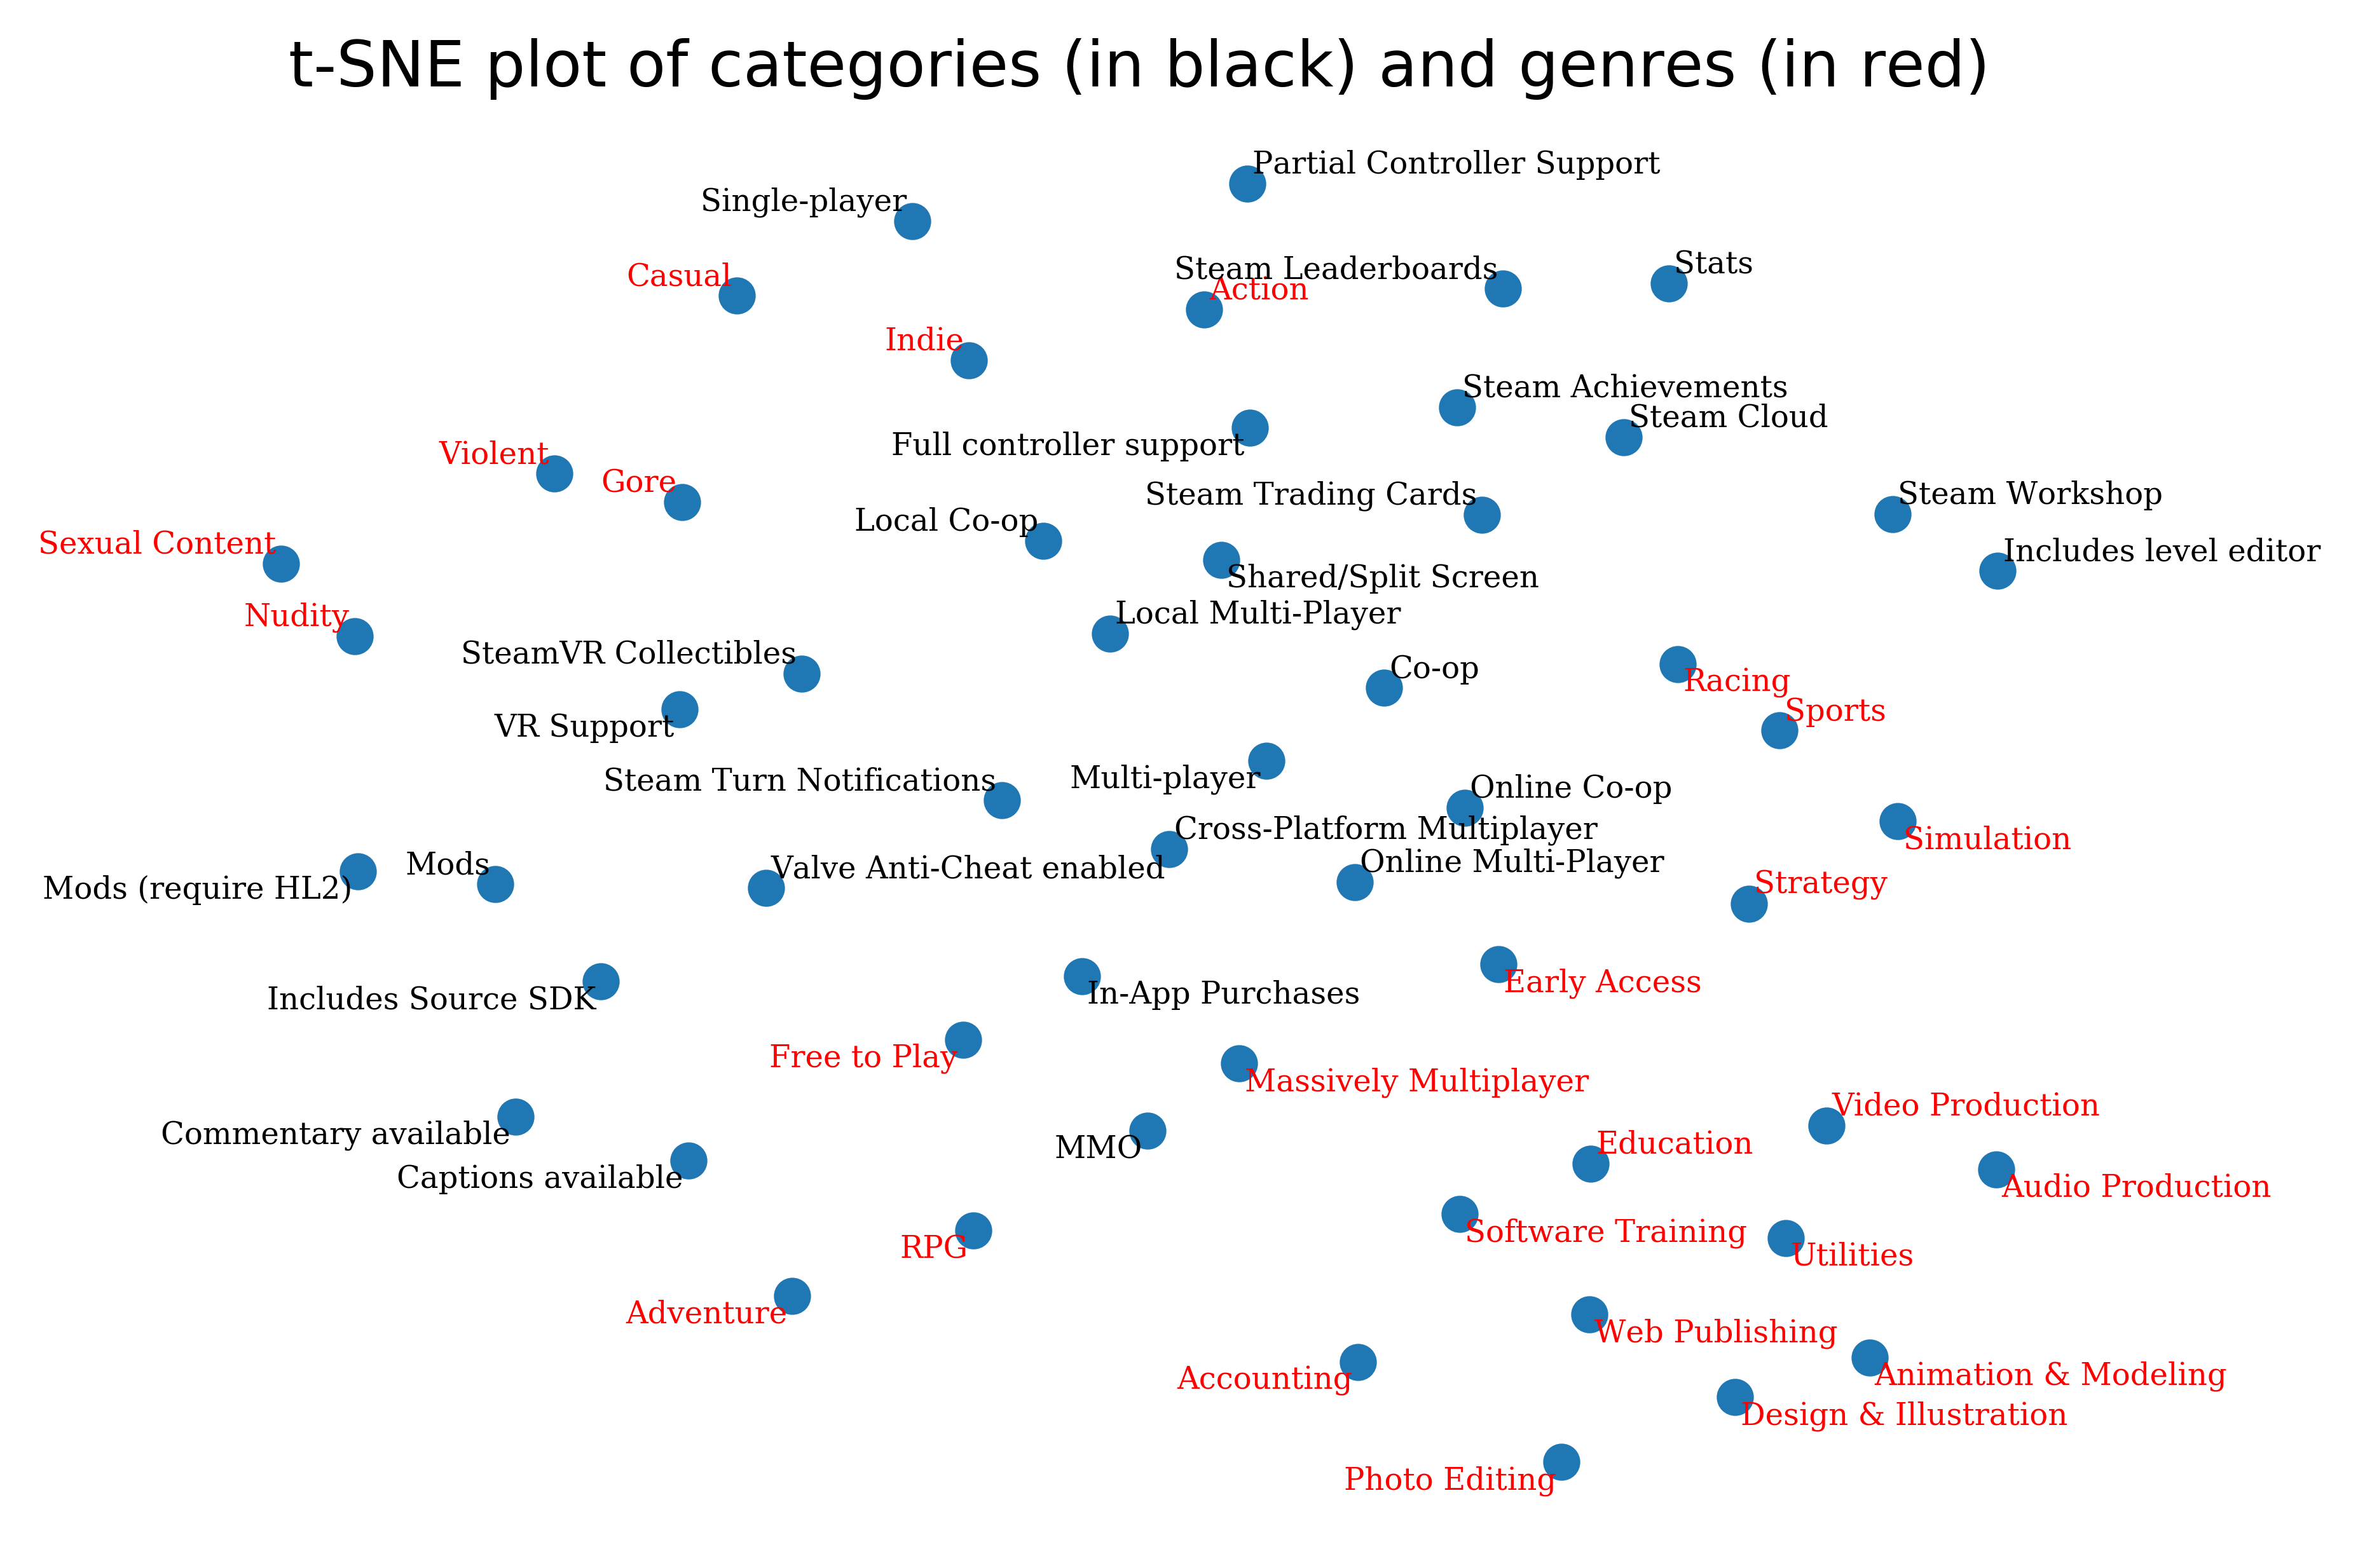 t-SNE plot of Steam categories and genres